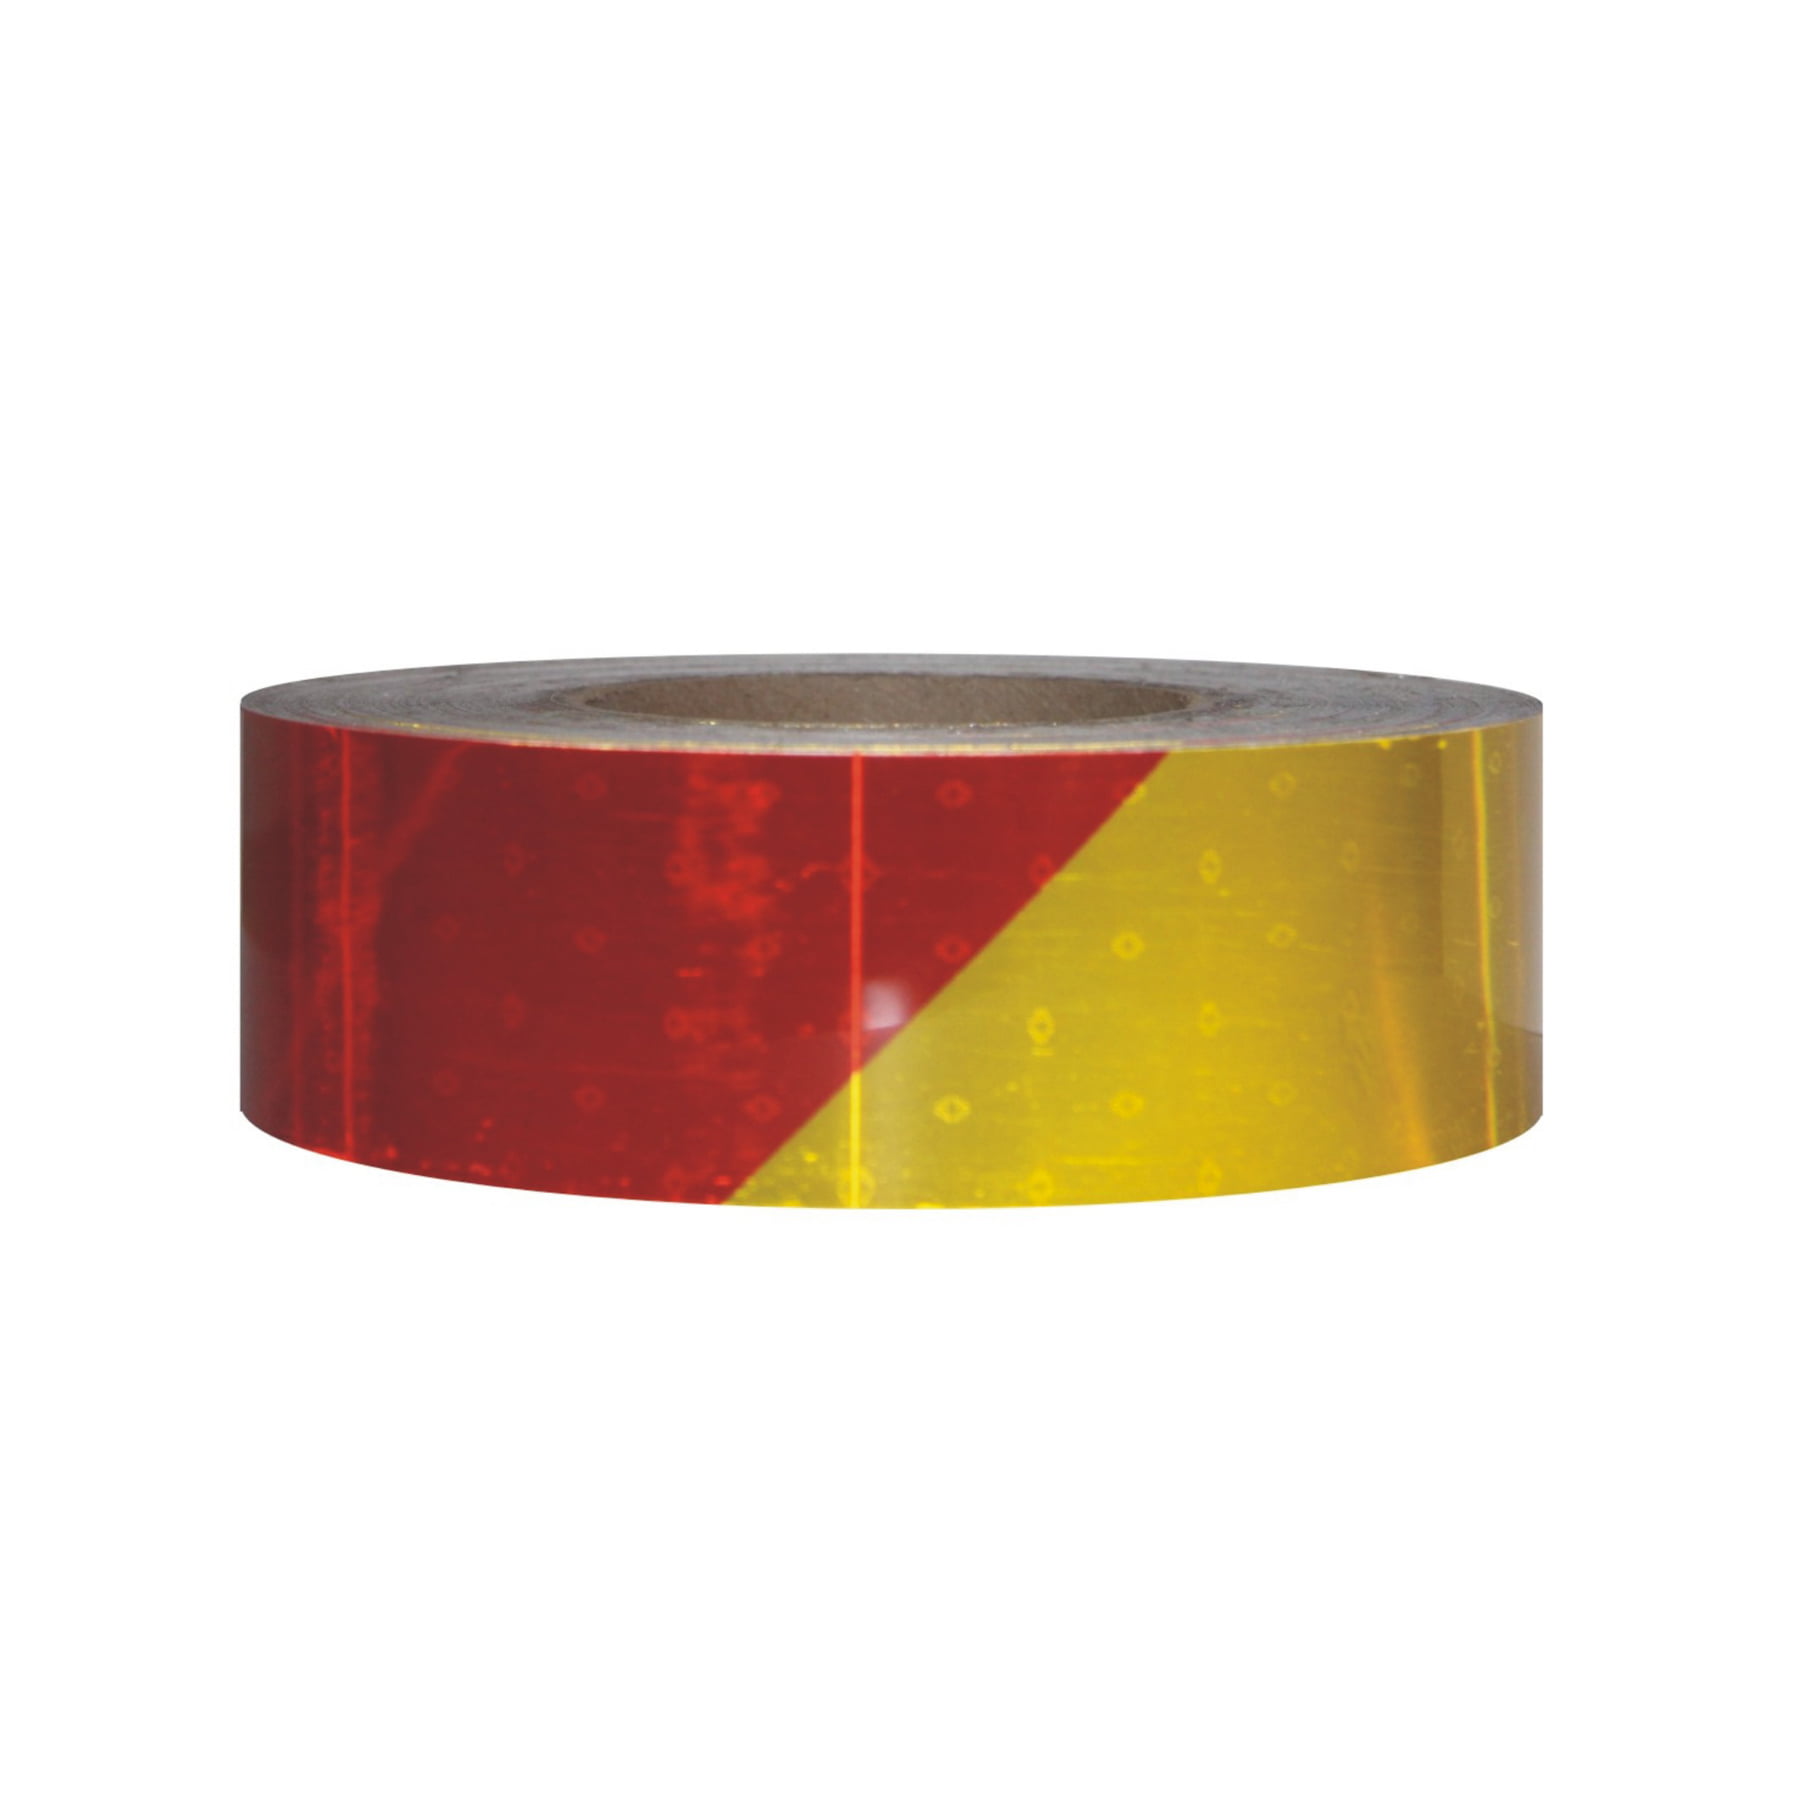 ADHESIVE REFLEXITE CONSPIC TAPE RED GOLD ANGLE - Styx Mill